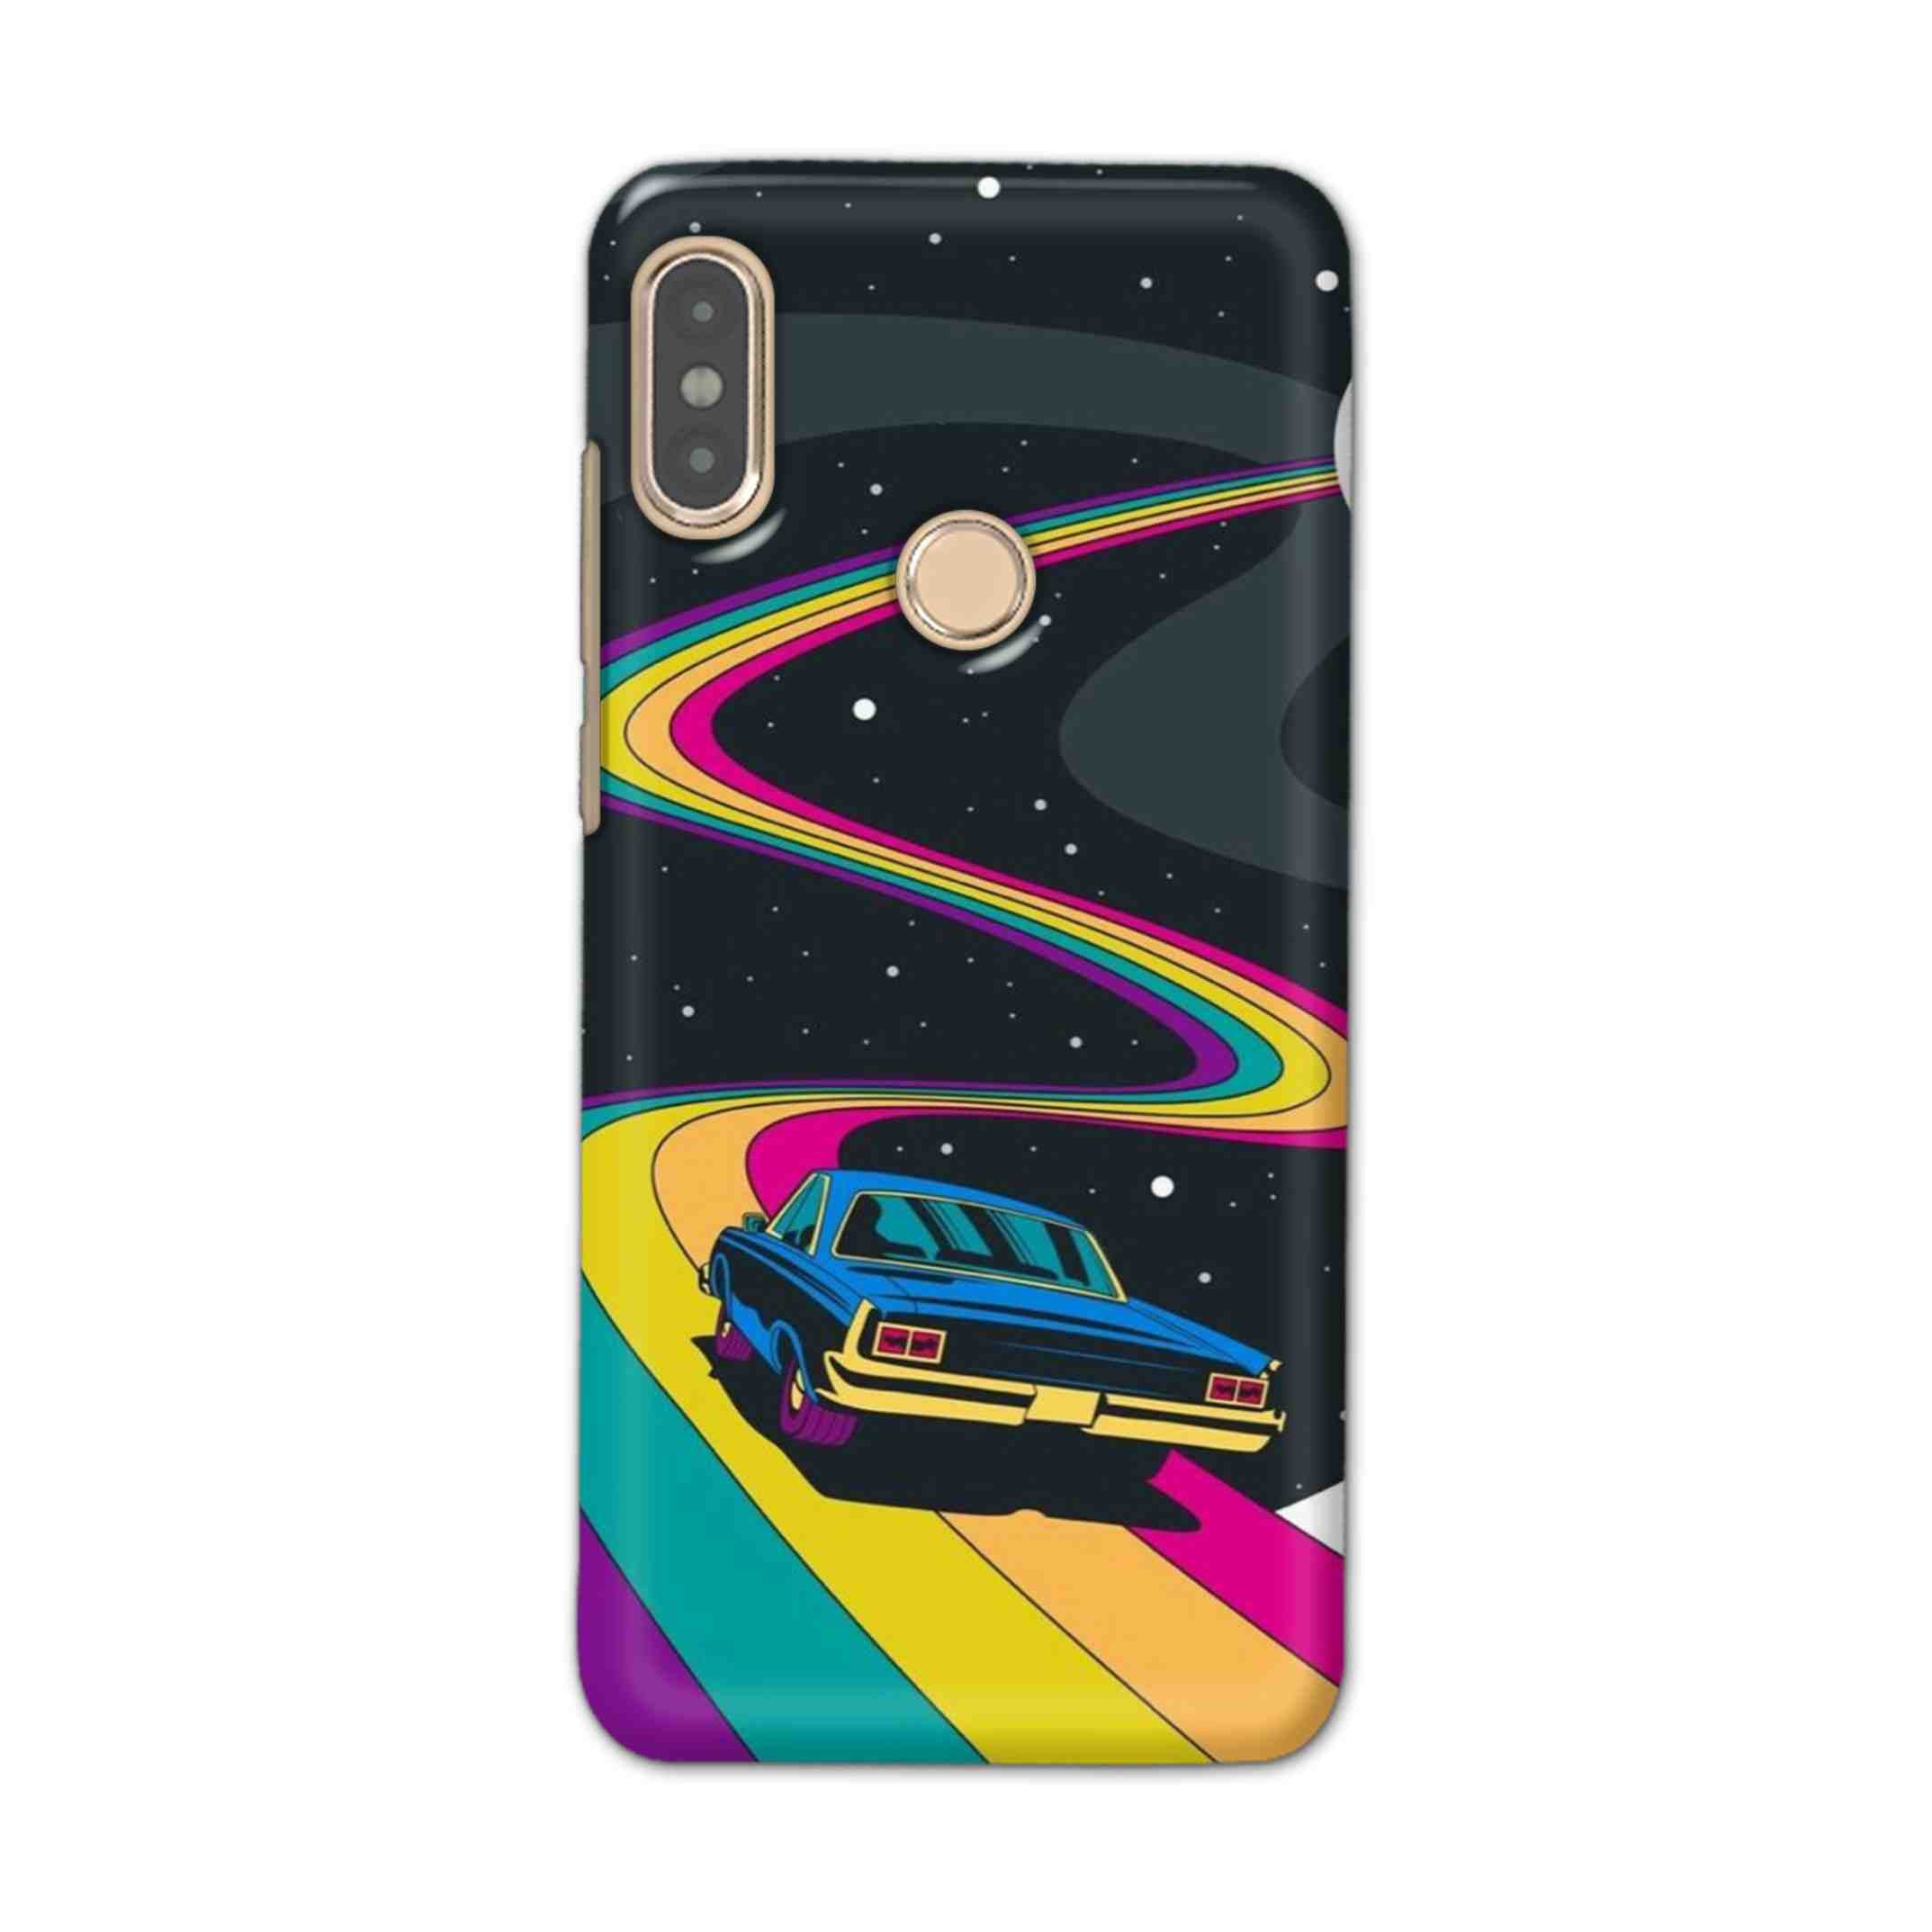 Buy  Neon Car Hard Back Mobile Phone Case Cover For Xiaomi Redmi Note 5 Pro Online